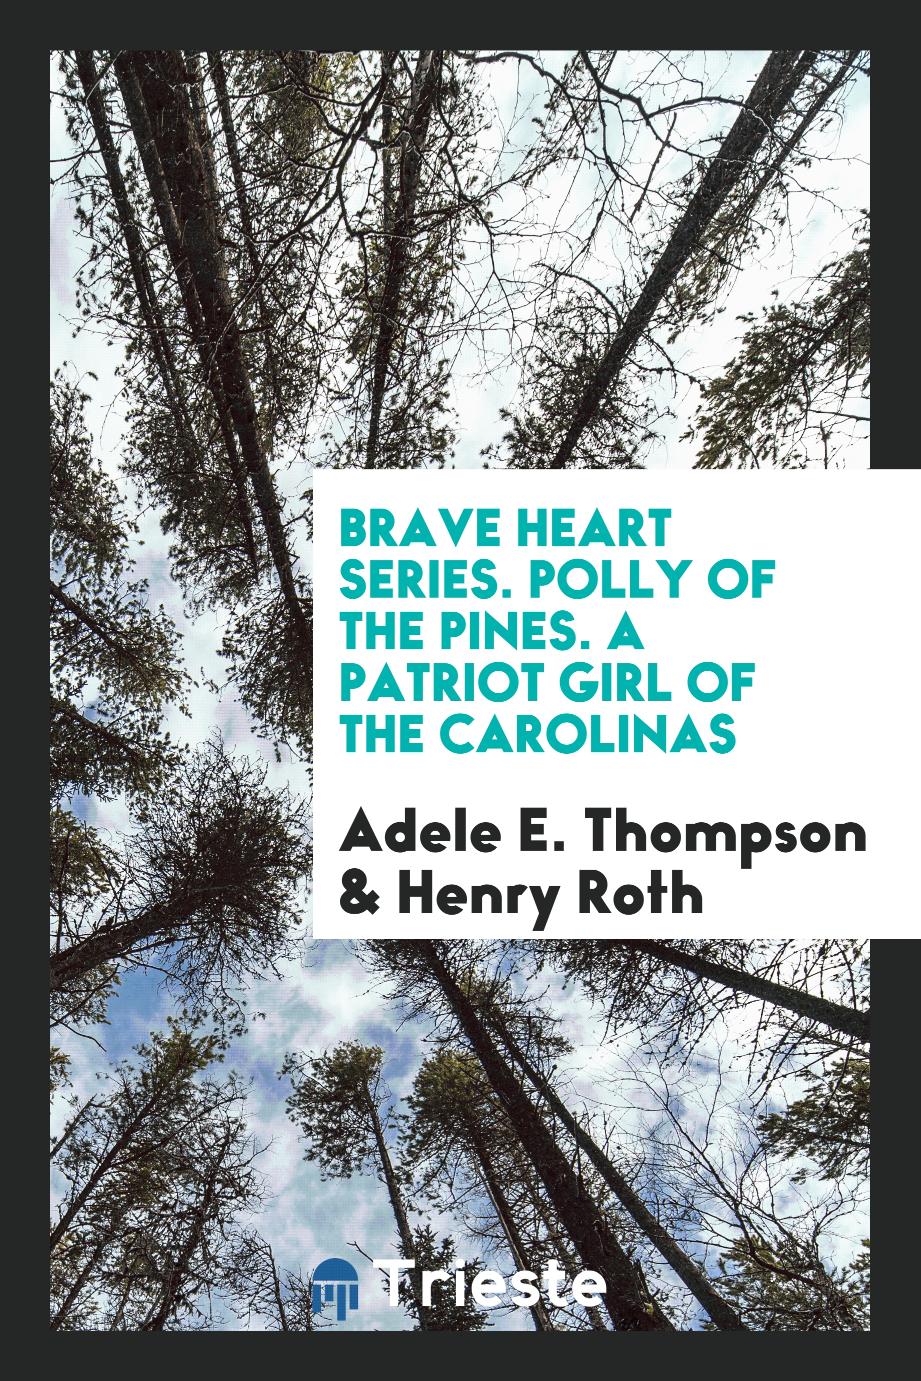 Brave Heart Series. Polly of the Pines. A Patriot Girl of the Carolinas